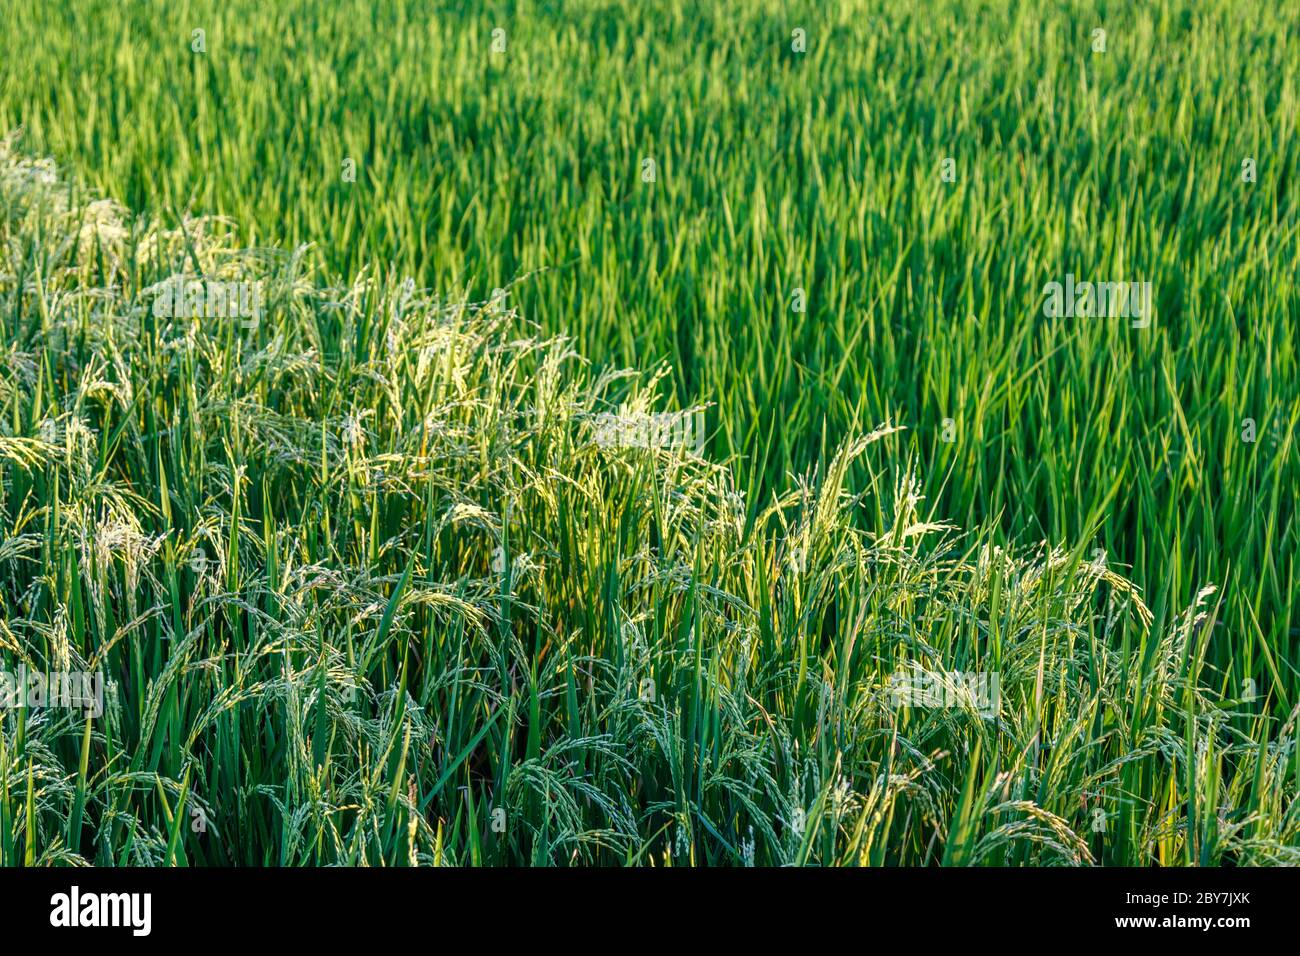 Rice field at two stages: ripe rice ready for harvesting and young growing rice. Bali Island, Indonesia. Stock Photo